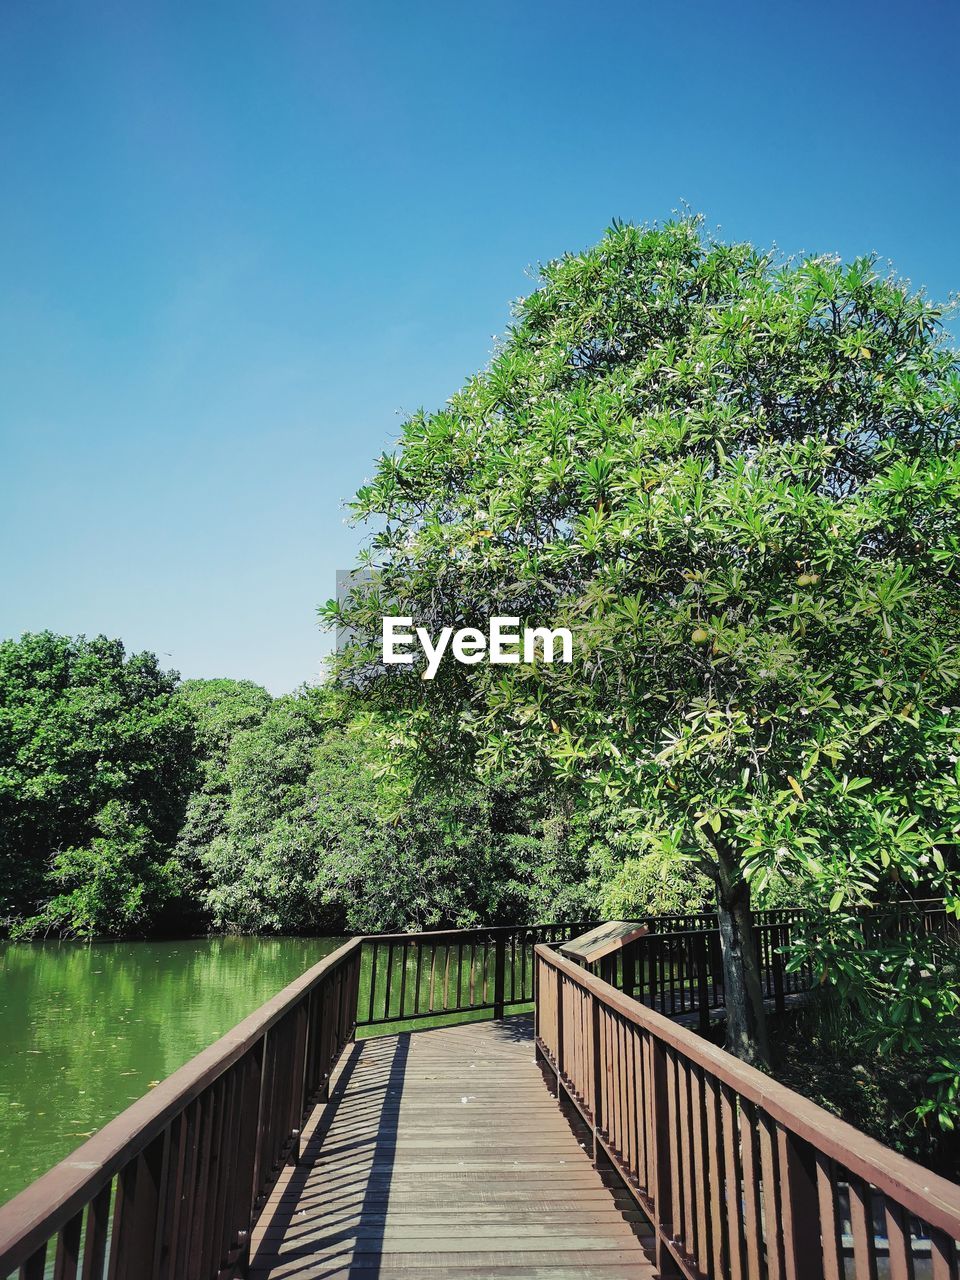 plant, tree, railing, nature, green, sky, bridge, architecture, no people, the way forward, beauty in nature, built structure, footbridge, growth, tranquility, day, water, footpath, flower, outdoors, wood, leaf, tranquil scene, scenics - nature, clear sky, foliage, forest, sunlight, lush foliage, blue, non-urban scene, walkway